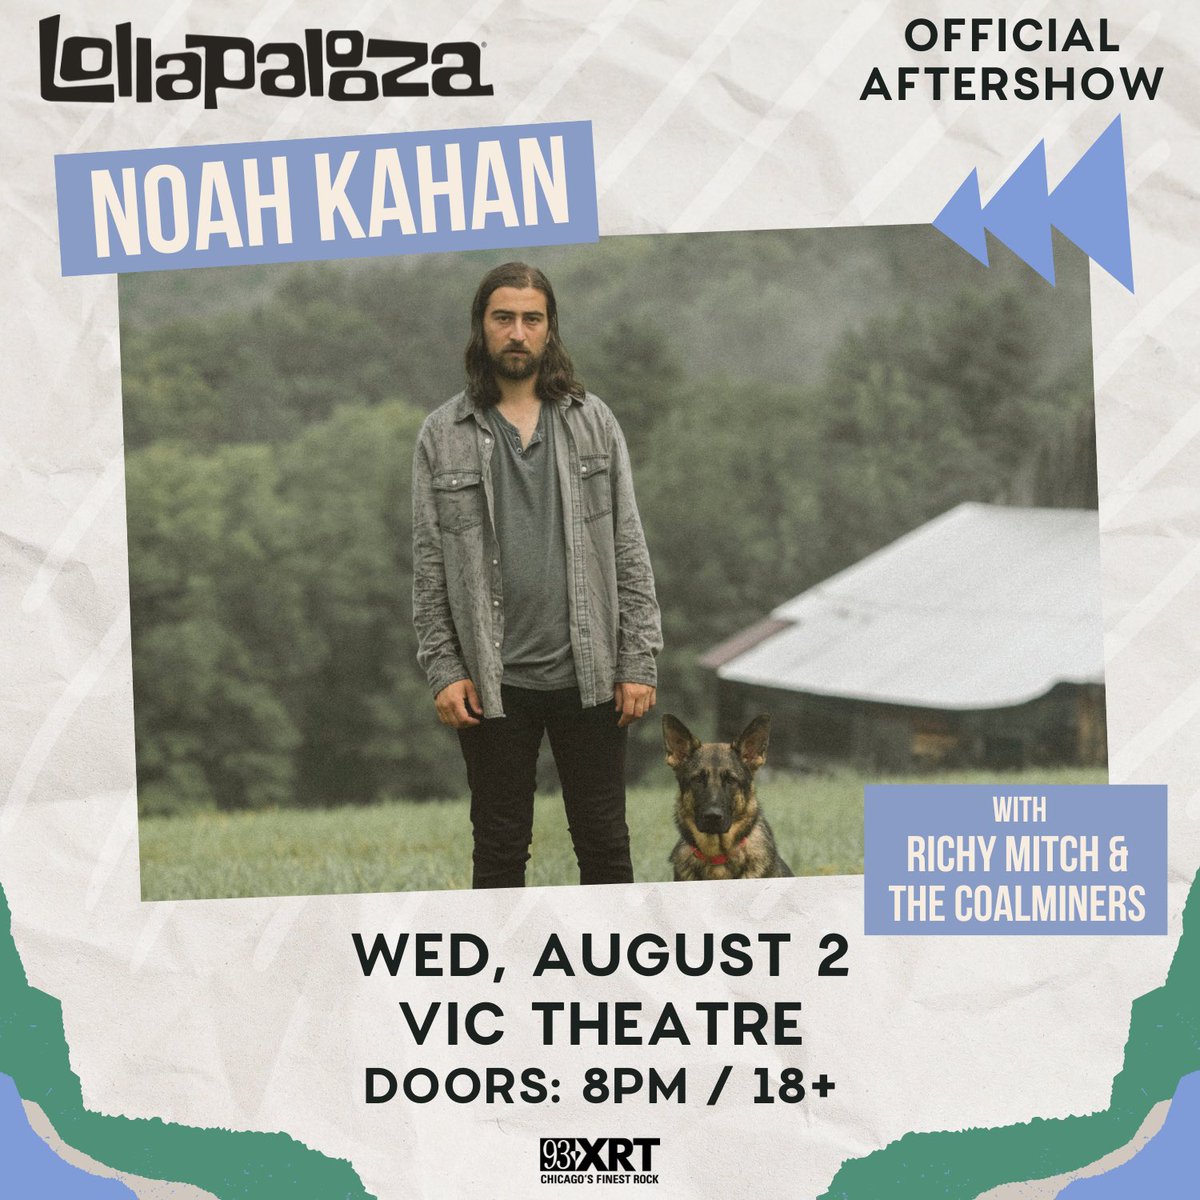 @lollapalooza aftershow lets go